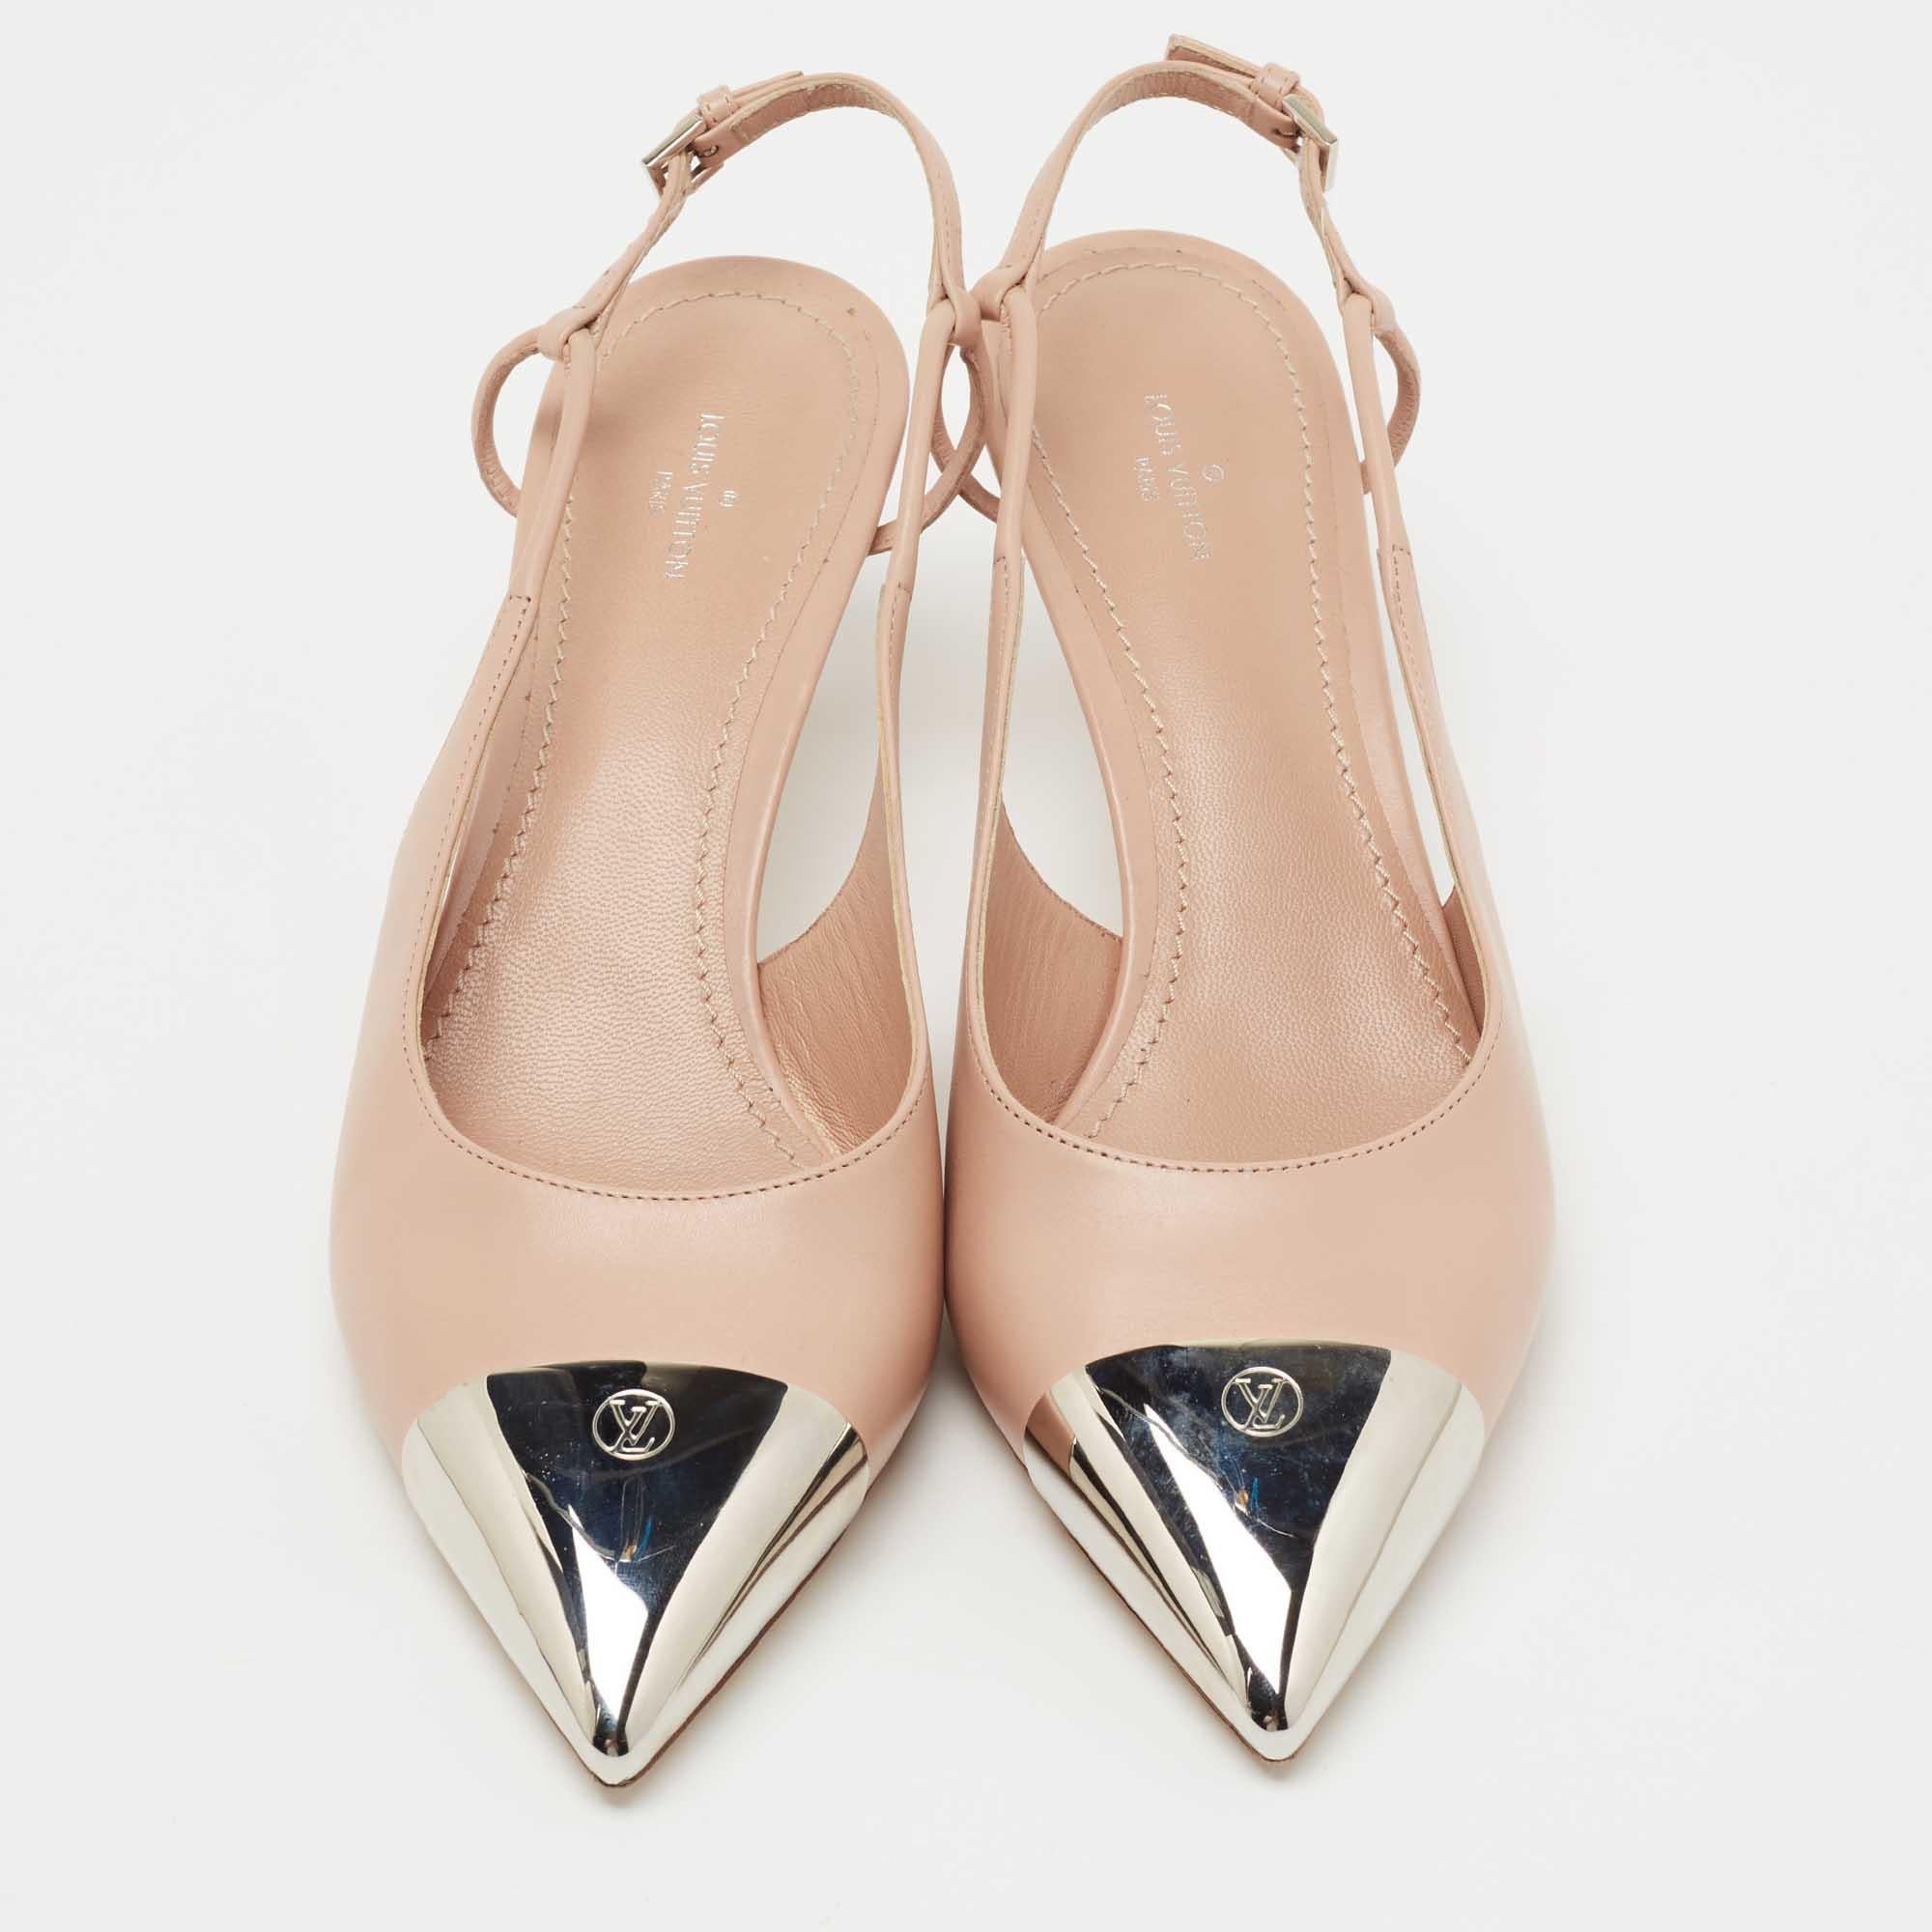 Exhibit an elegant style with this pair of pumps. These designer pumps are crafted from quality materials. They are set on durable soles and sleek heels.

